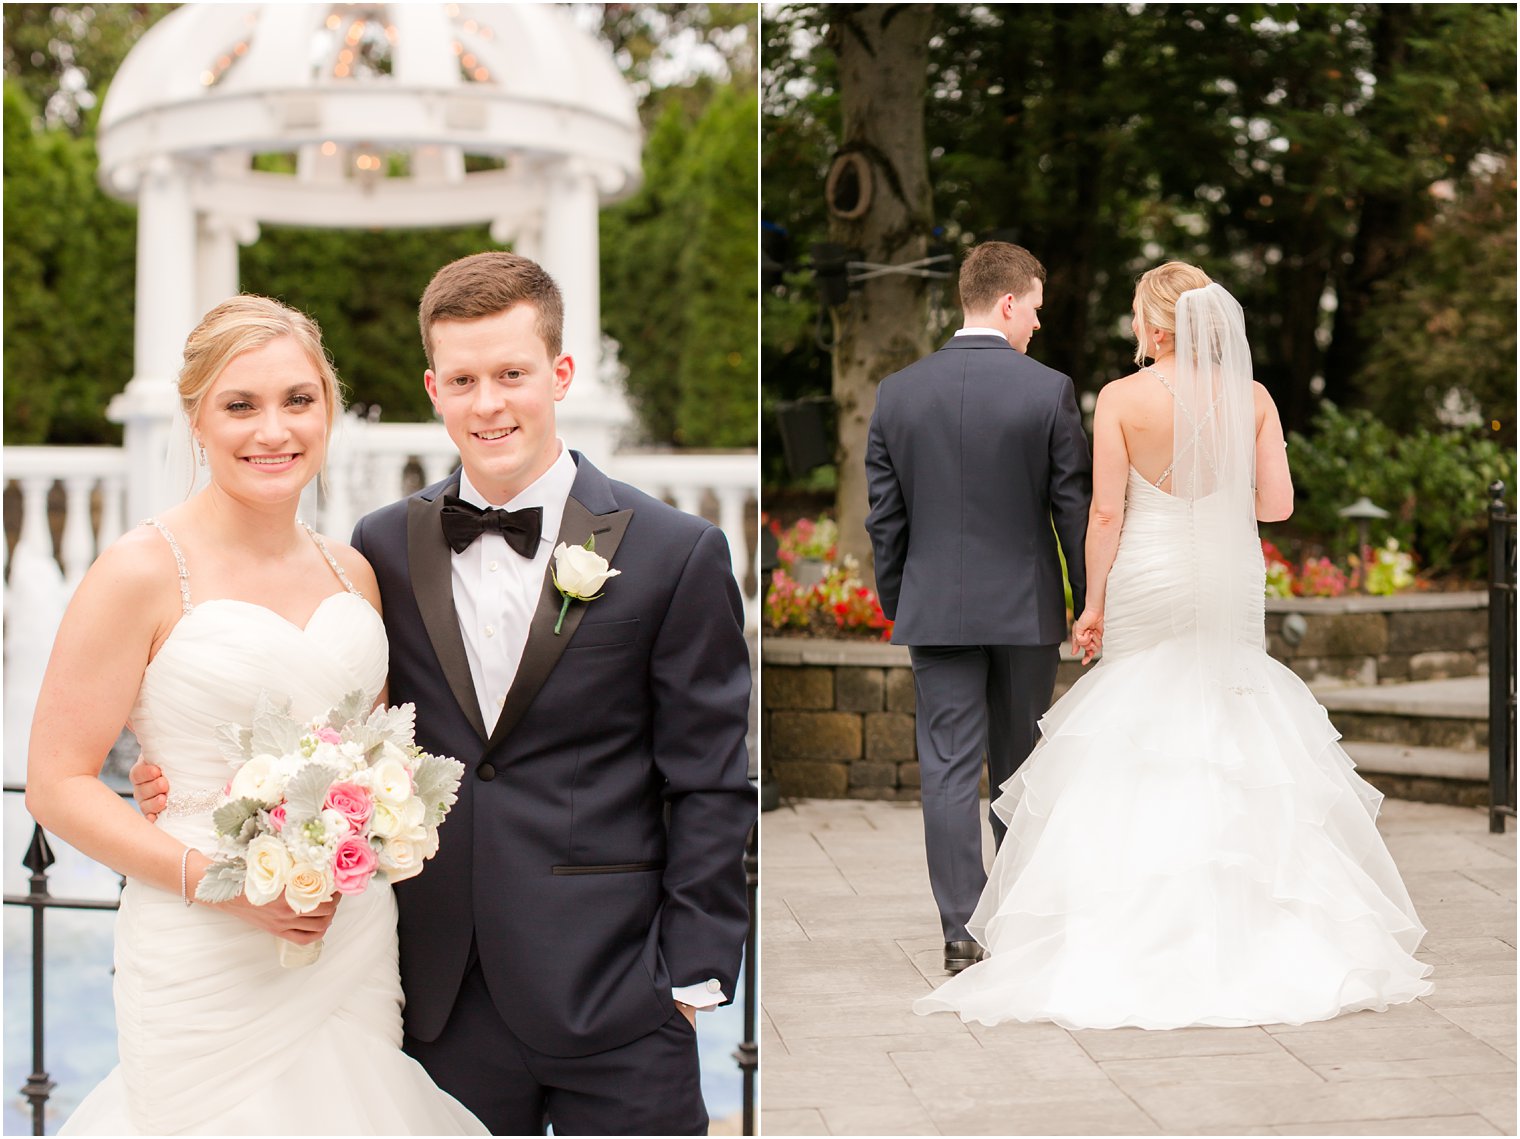 Bride and groom photos at Westmount Country Club